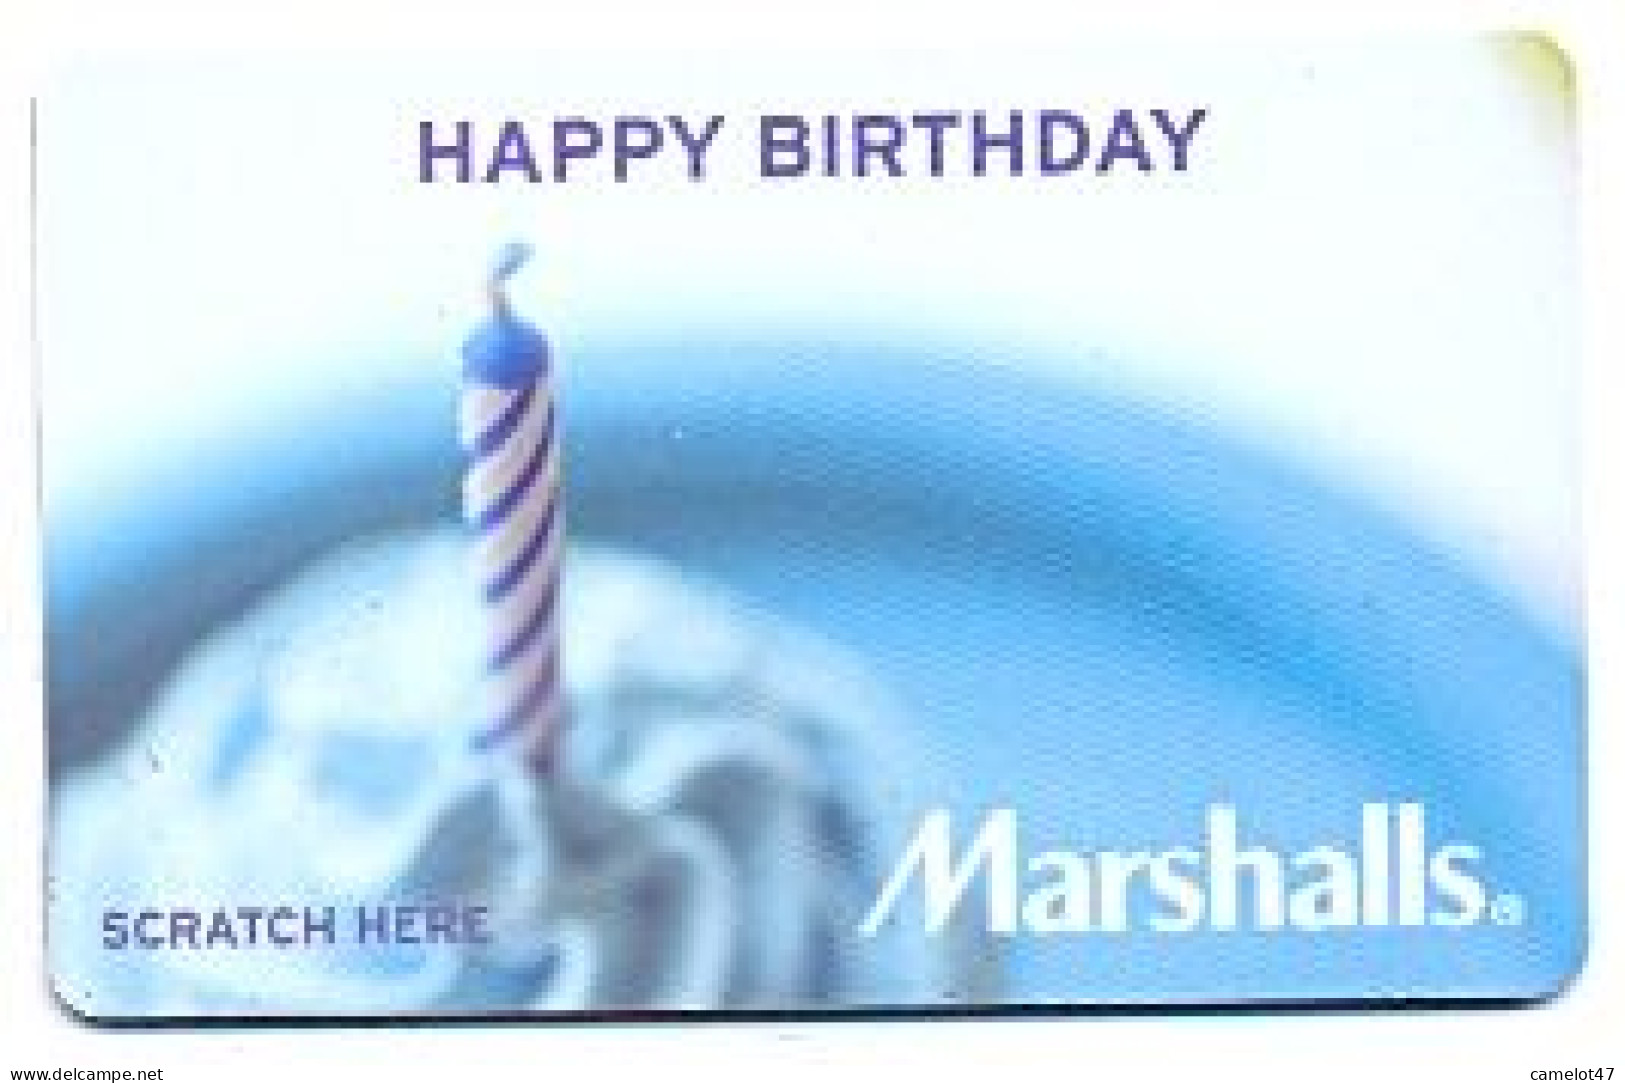 Marshalls, U.S.A., Carte Cadeau Pour Collection, Sans Valeur, # Marshalls-32 - Gift And Loyalty Cards